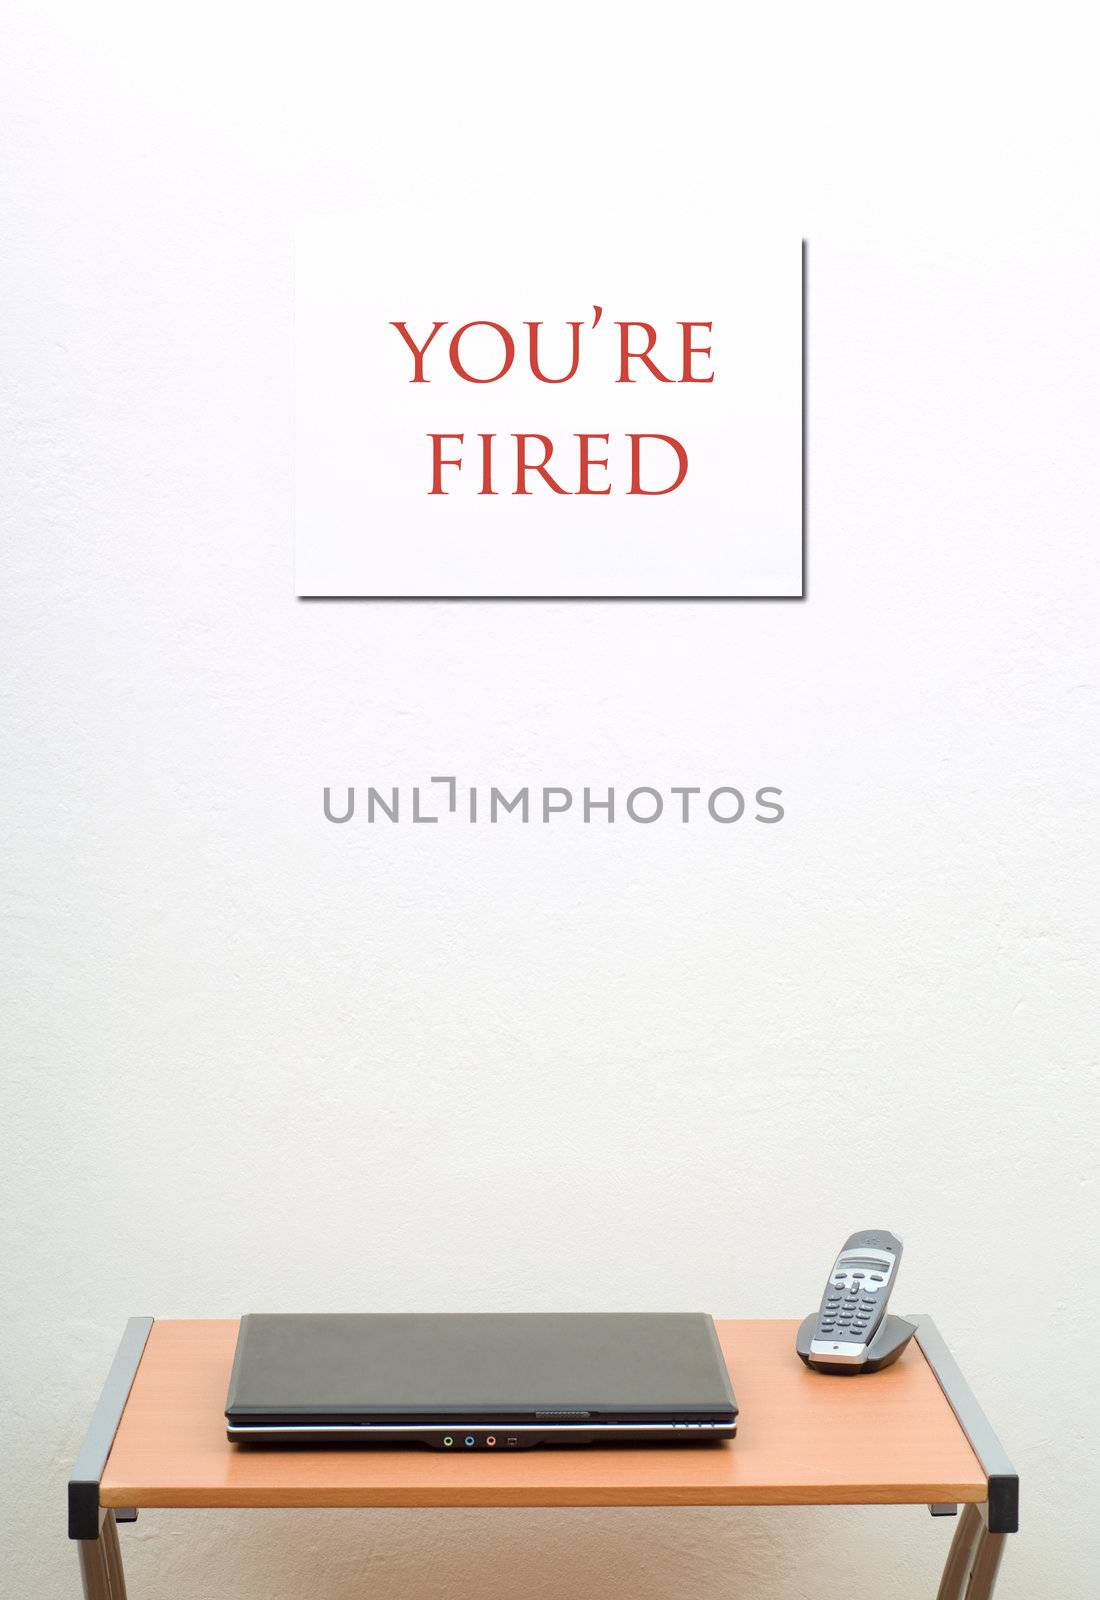 You're fired sign behind office desk with laptop and phone